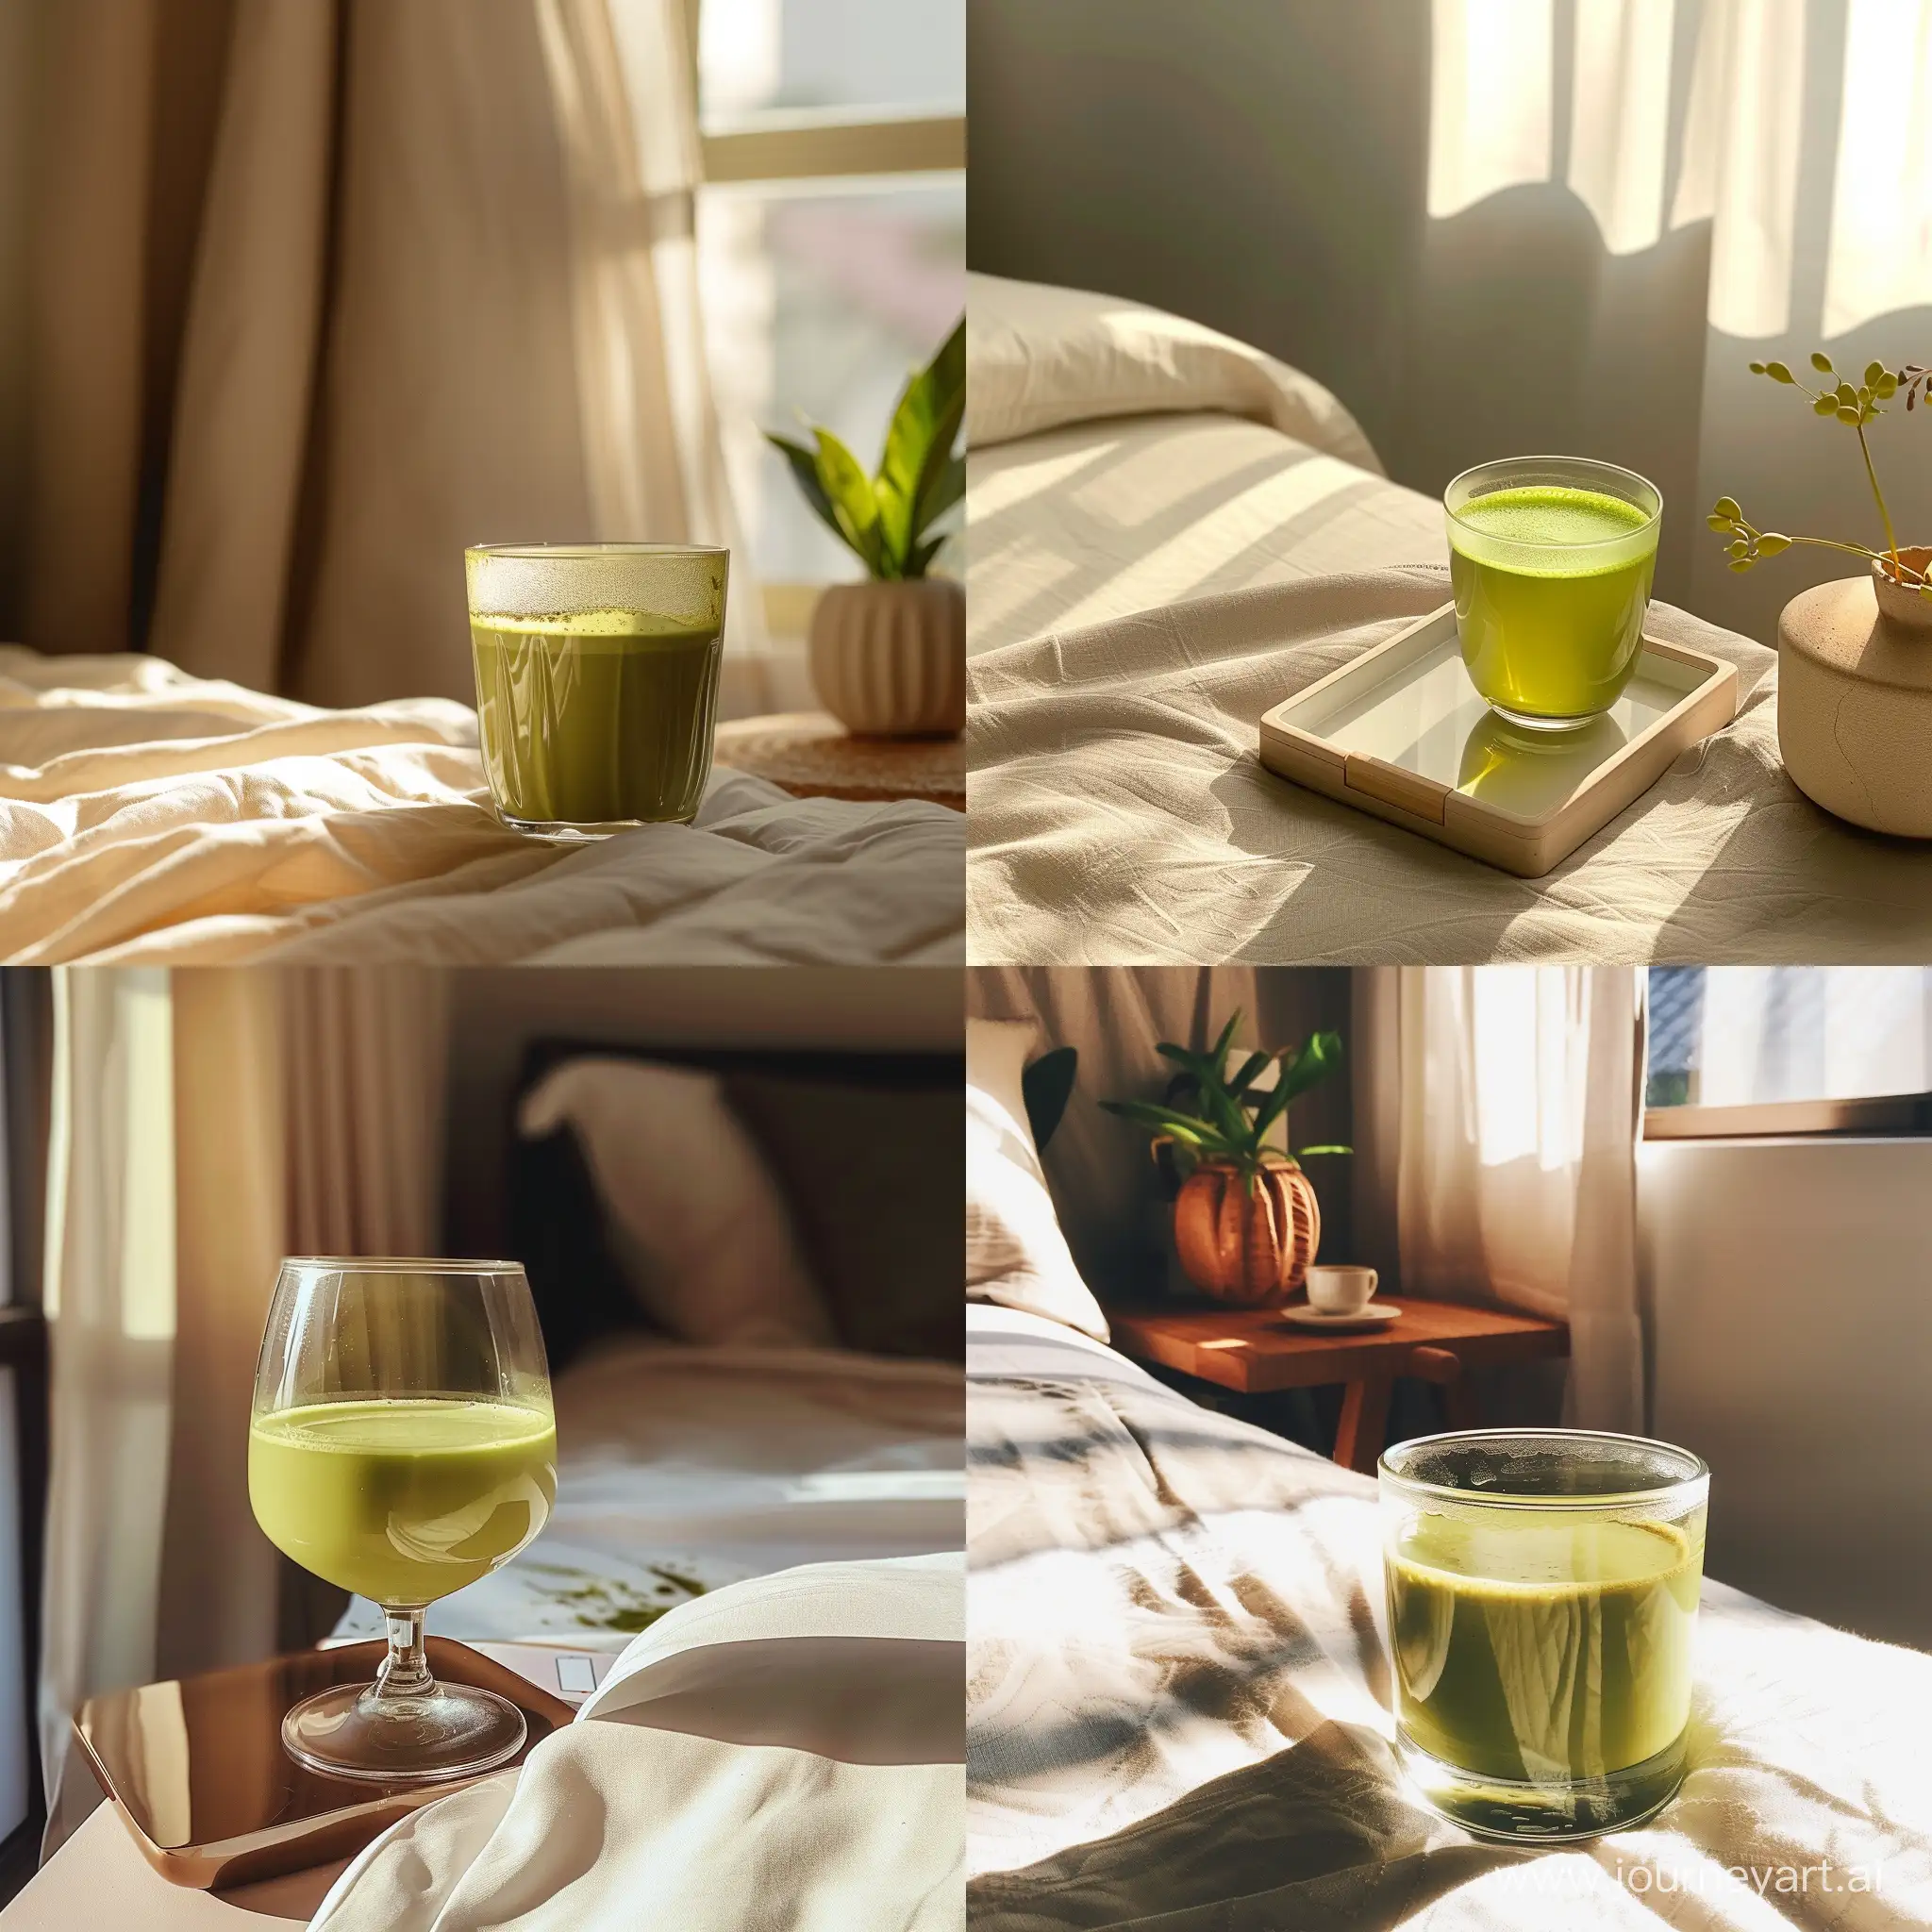 Natural shot of a glass of matcha tea on the bedside table.